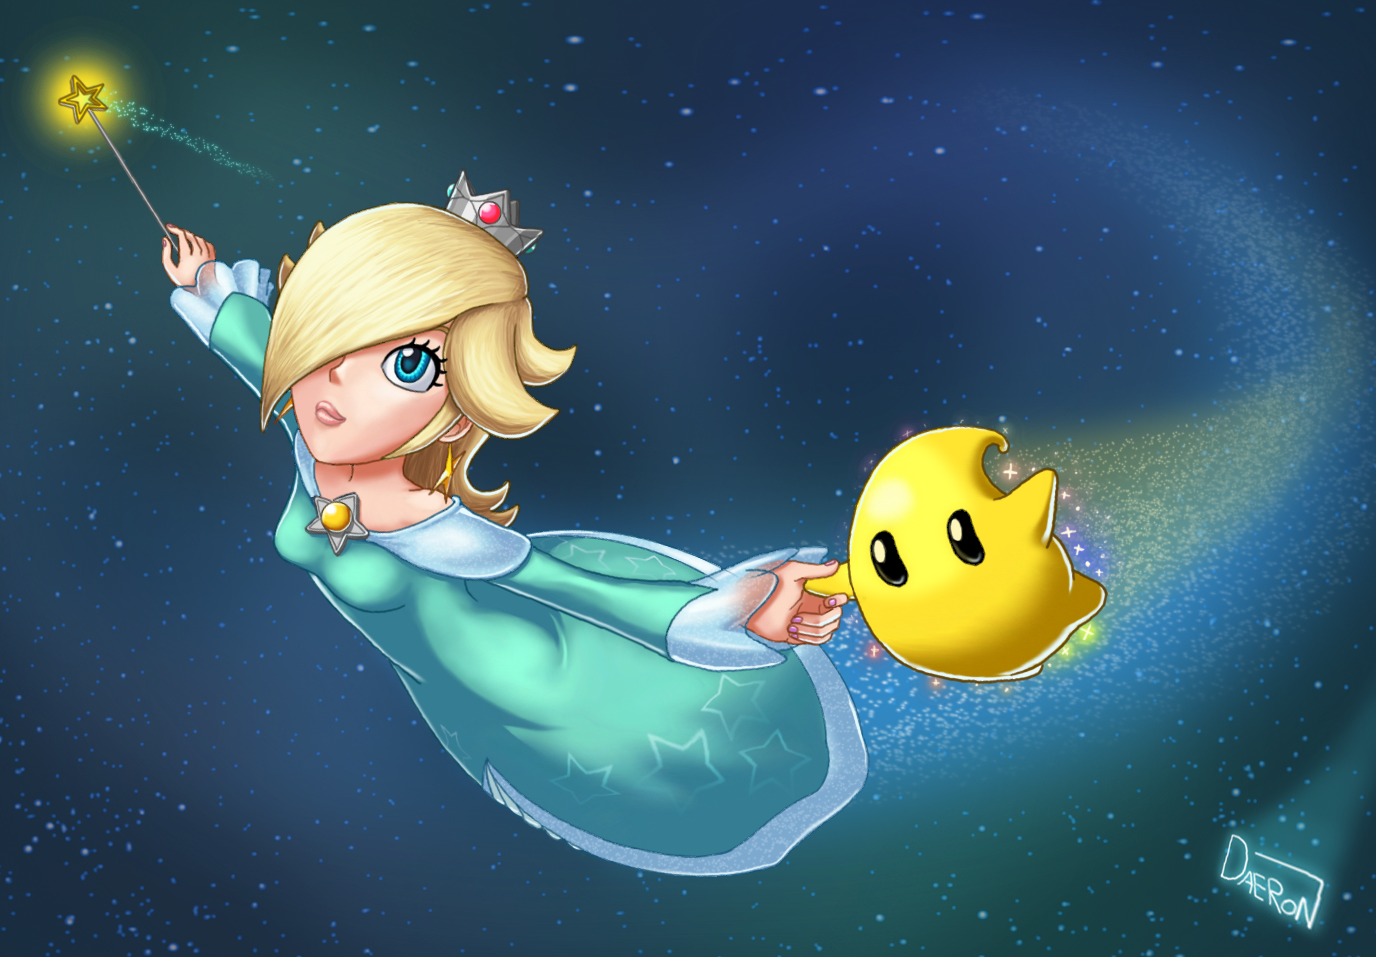 ROSALINA sadly continues to be unimpressive and struggles in her 1v1's...